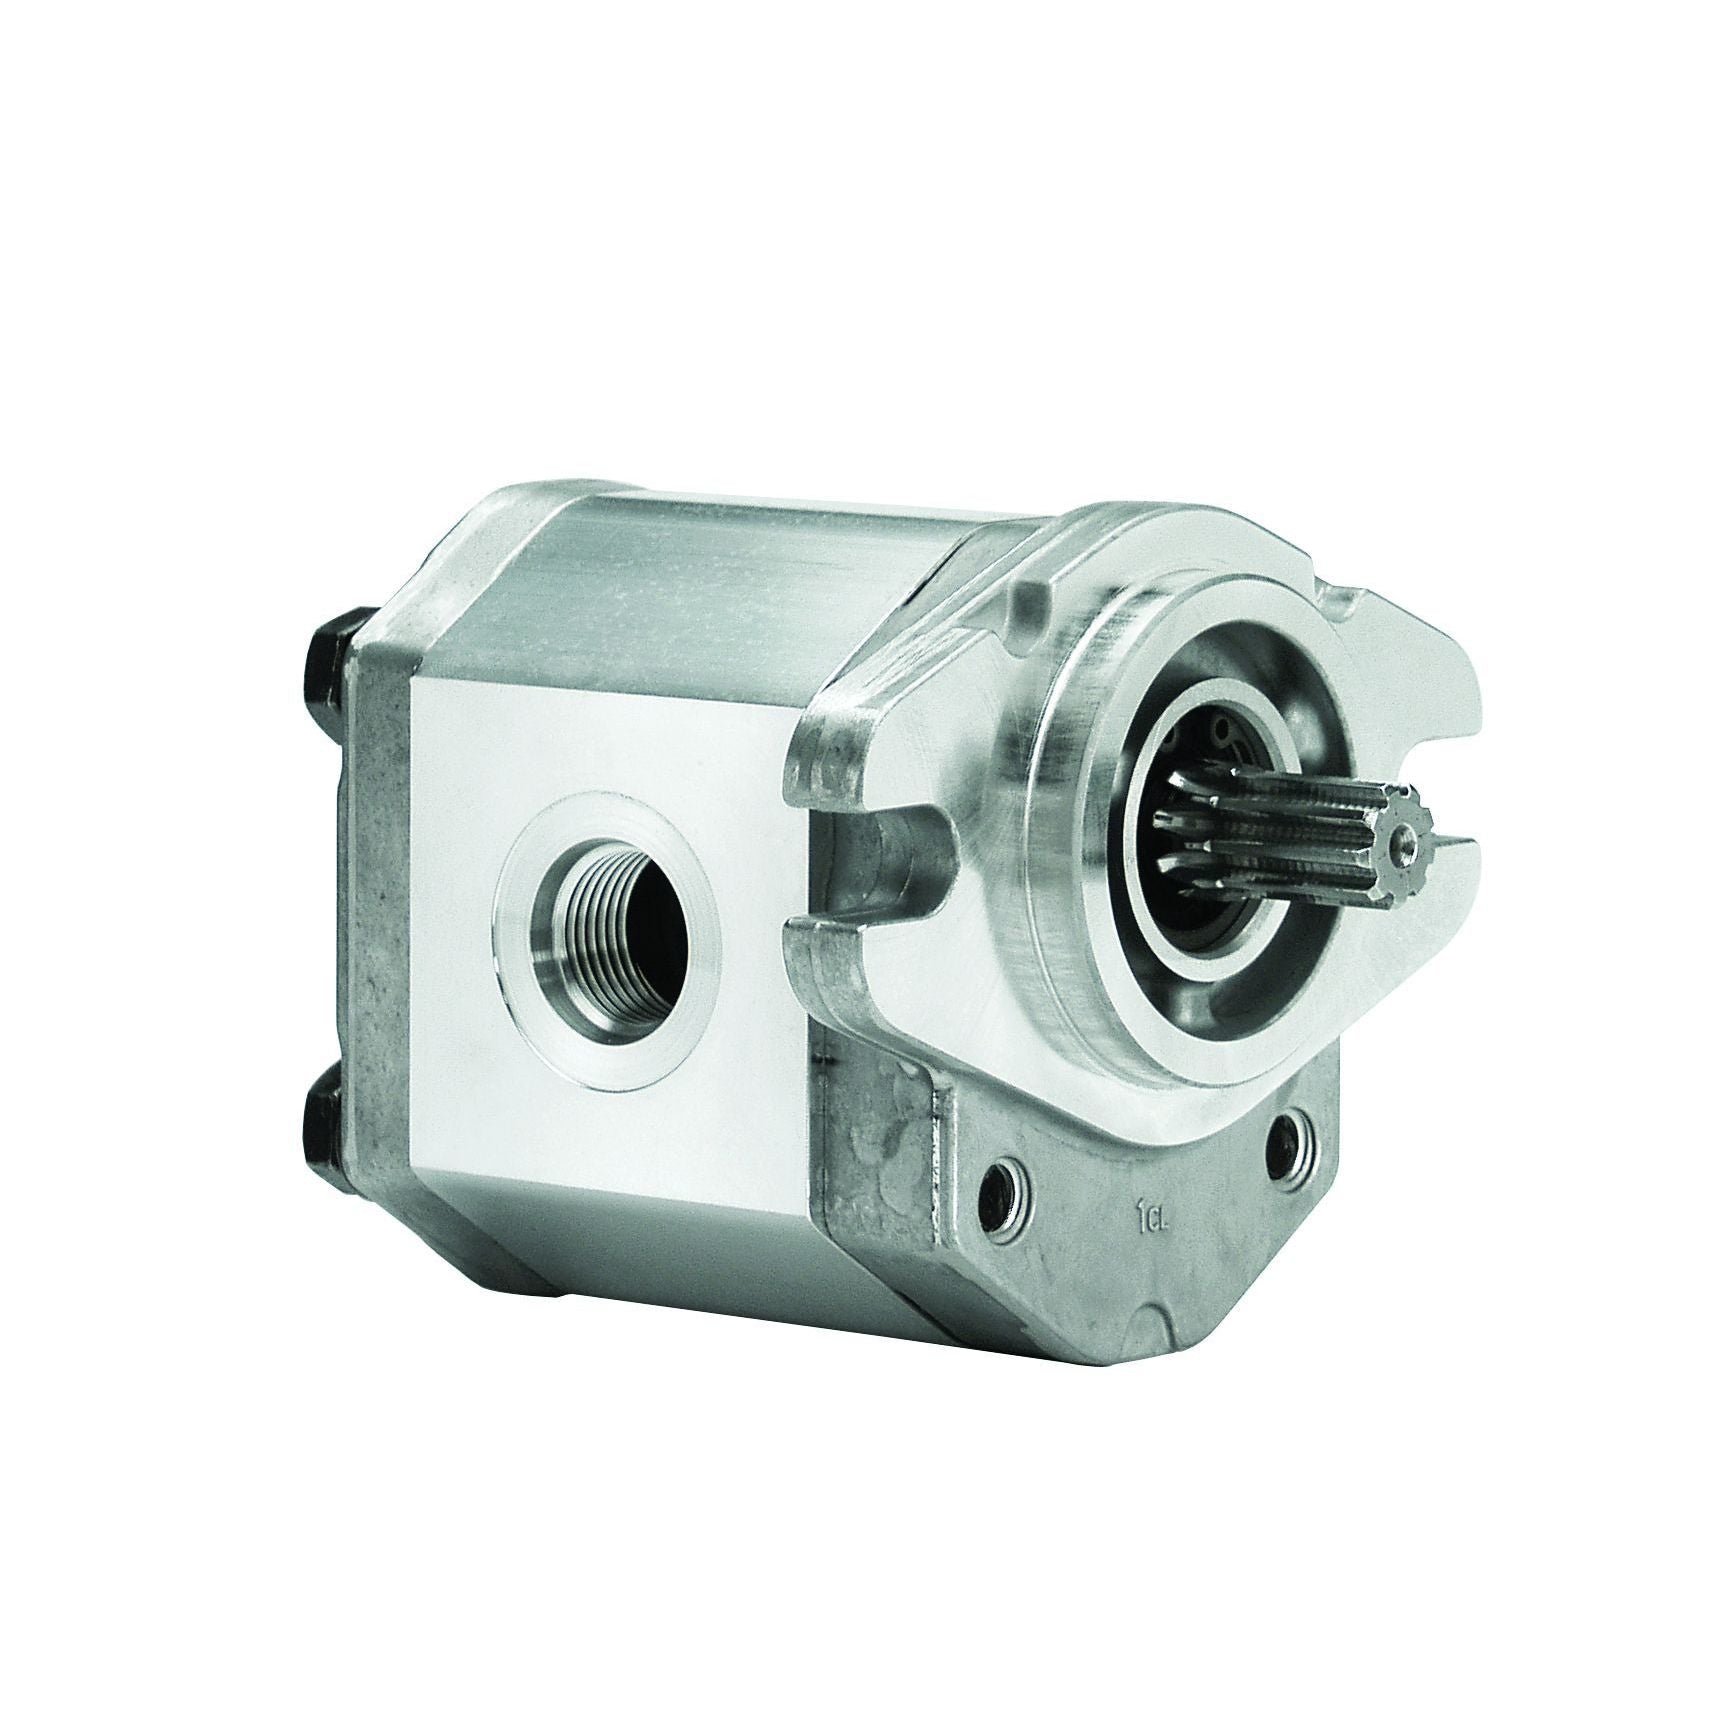 ALP2A-D-40-S1 : Marzocchi Gear Pump, CW, 28.2cc (1.7202in3), 13.4 GPM, 2465psi, 1800 RPM, #12 SAE (3/4") In, #10 SAE (5/8") Out, Splined Shaft 9T 16/32DP, SAE A 2-Bolt Mount